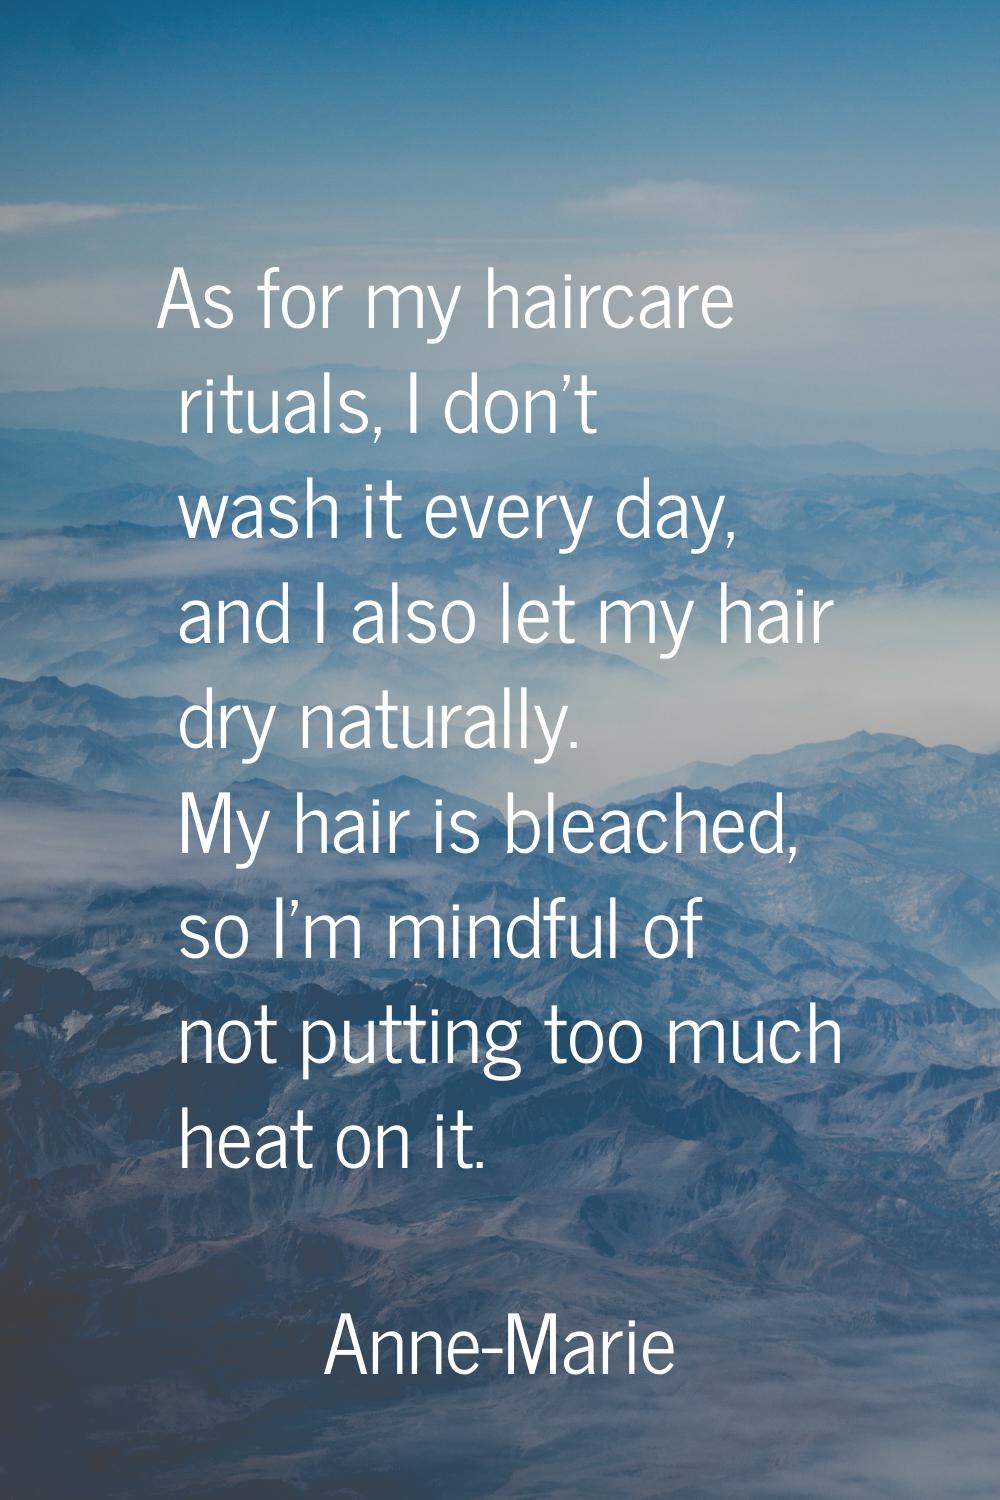 As for my haircare rituals, I don't wash it every day, and I also let my hair dry naturally. My hai